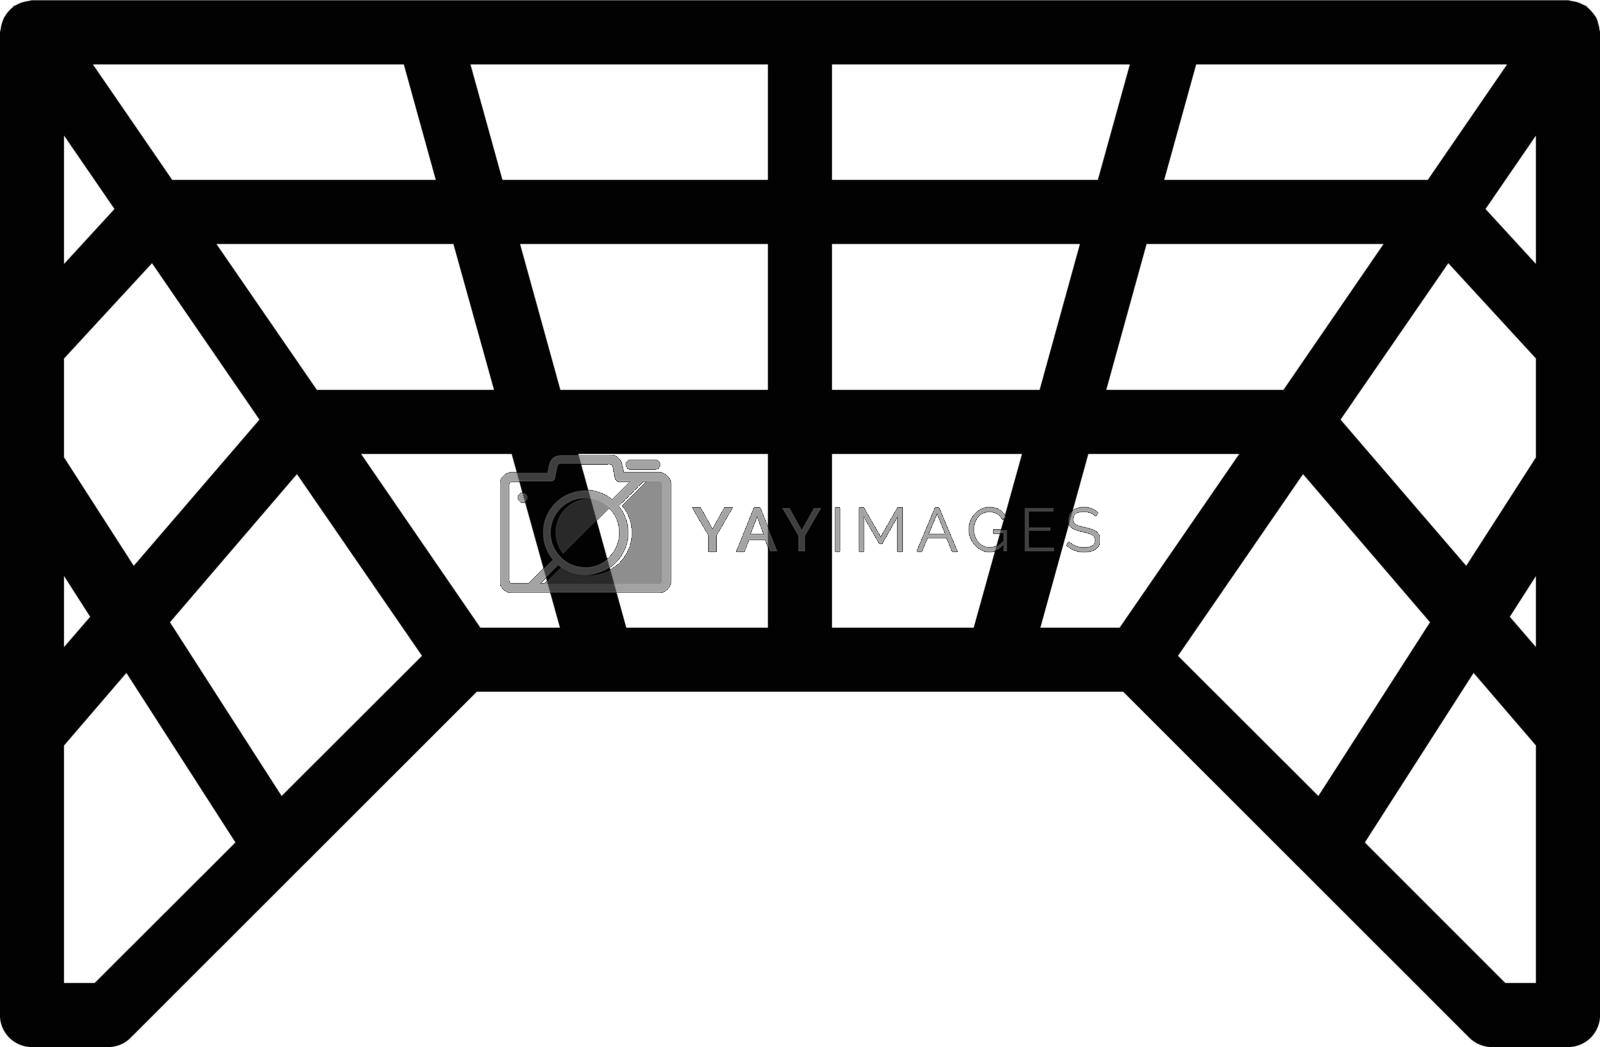 Royalty free image of net by FlaticonsDesign